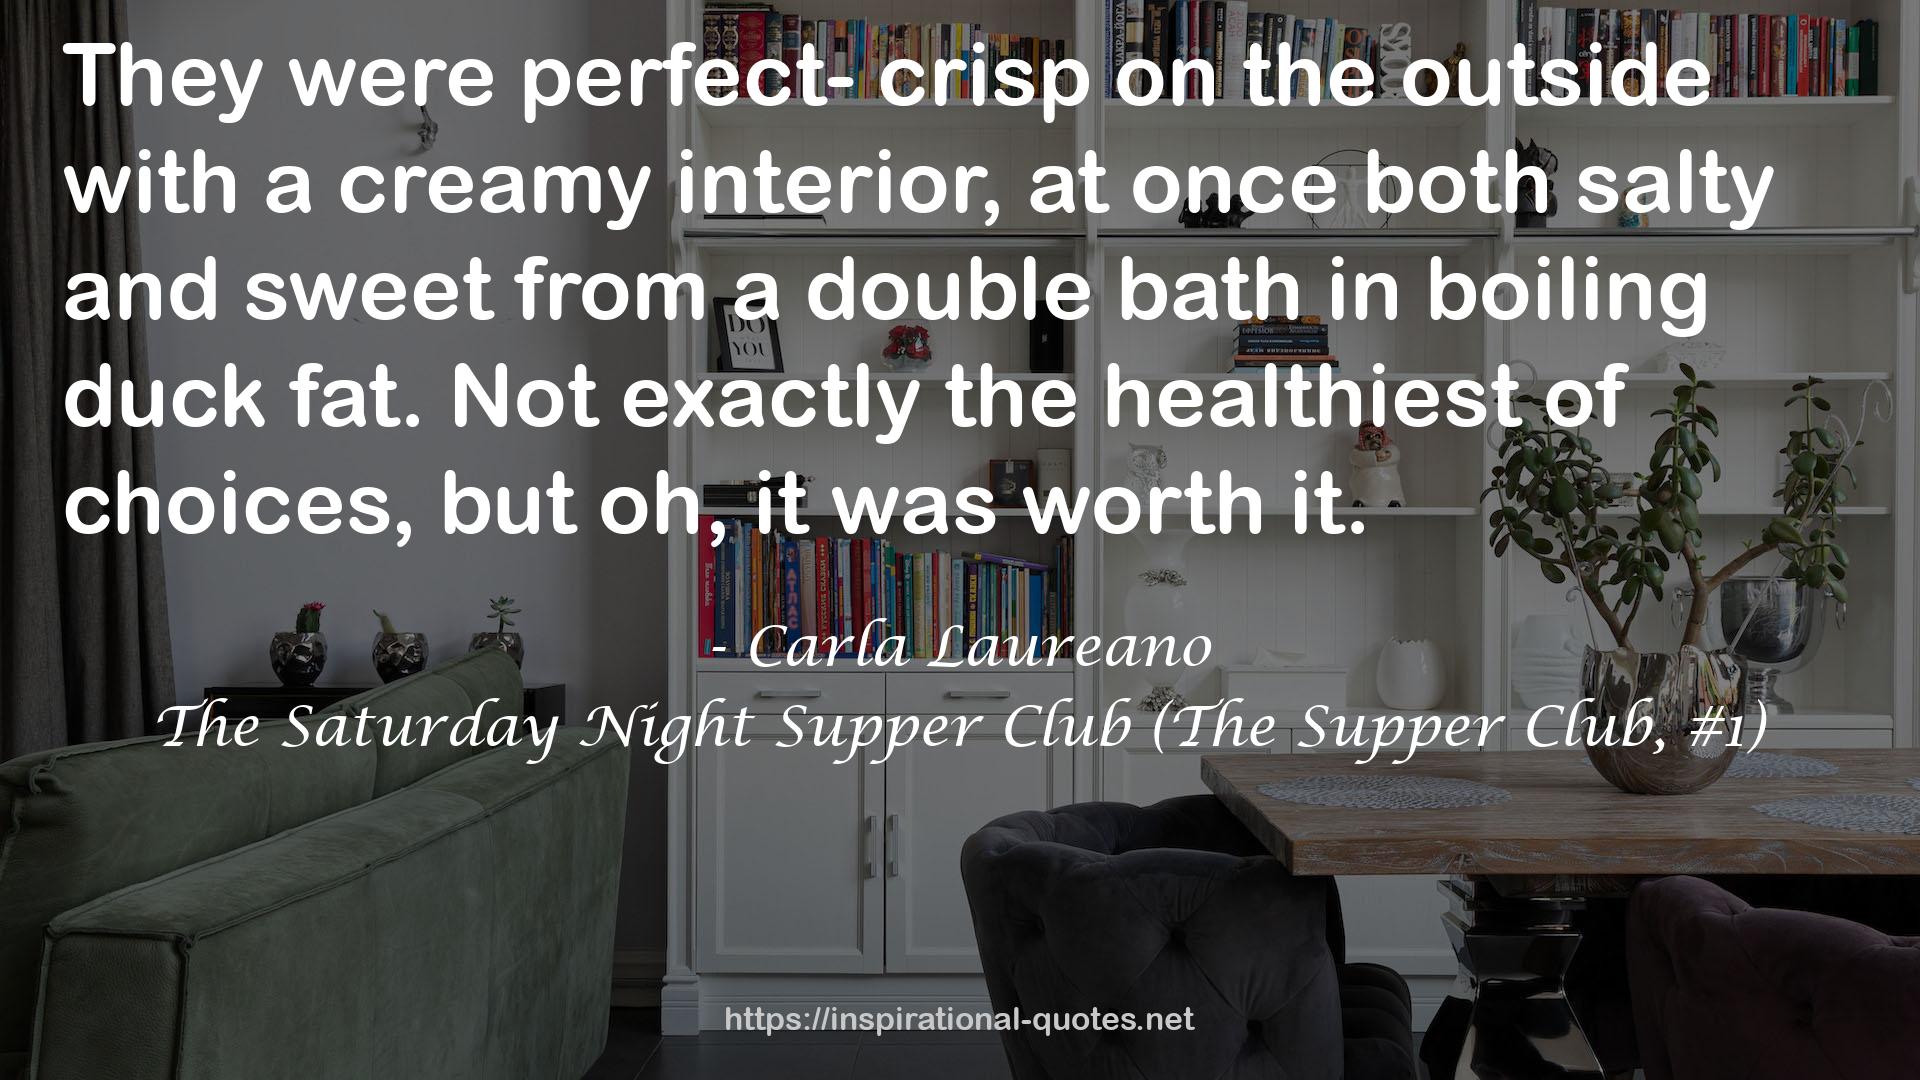 The Saturday Night Supper Club (The Supper Club, #1) QUOTES